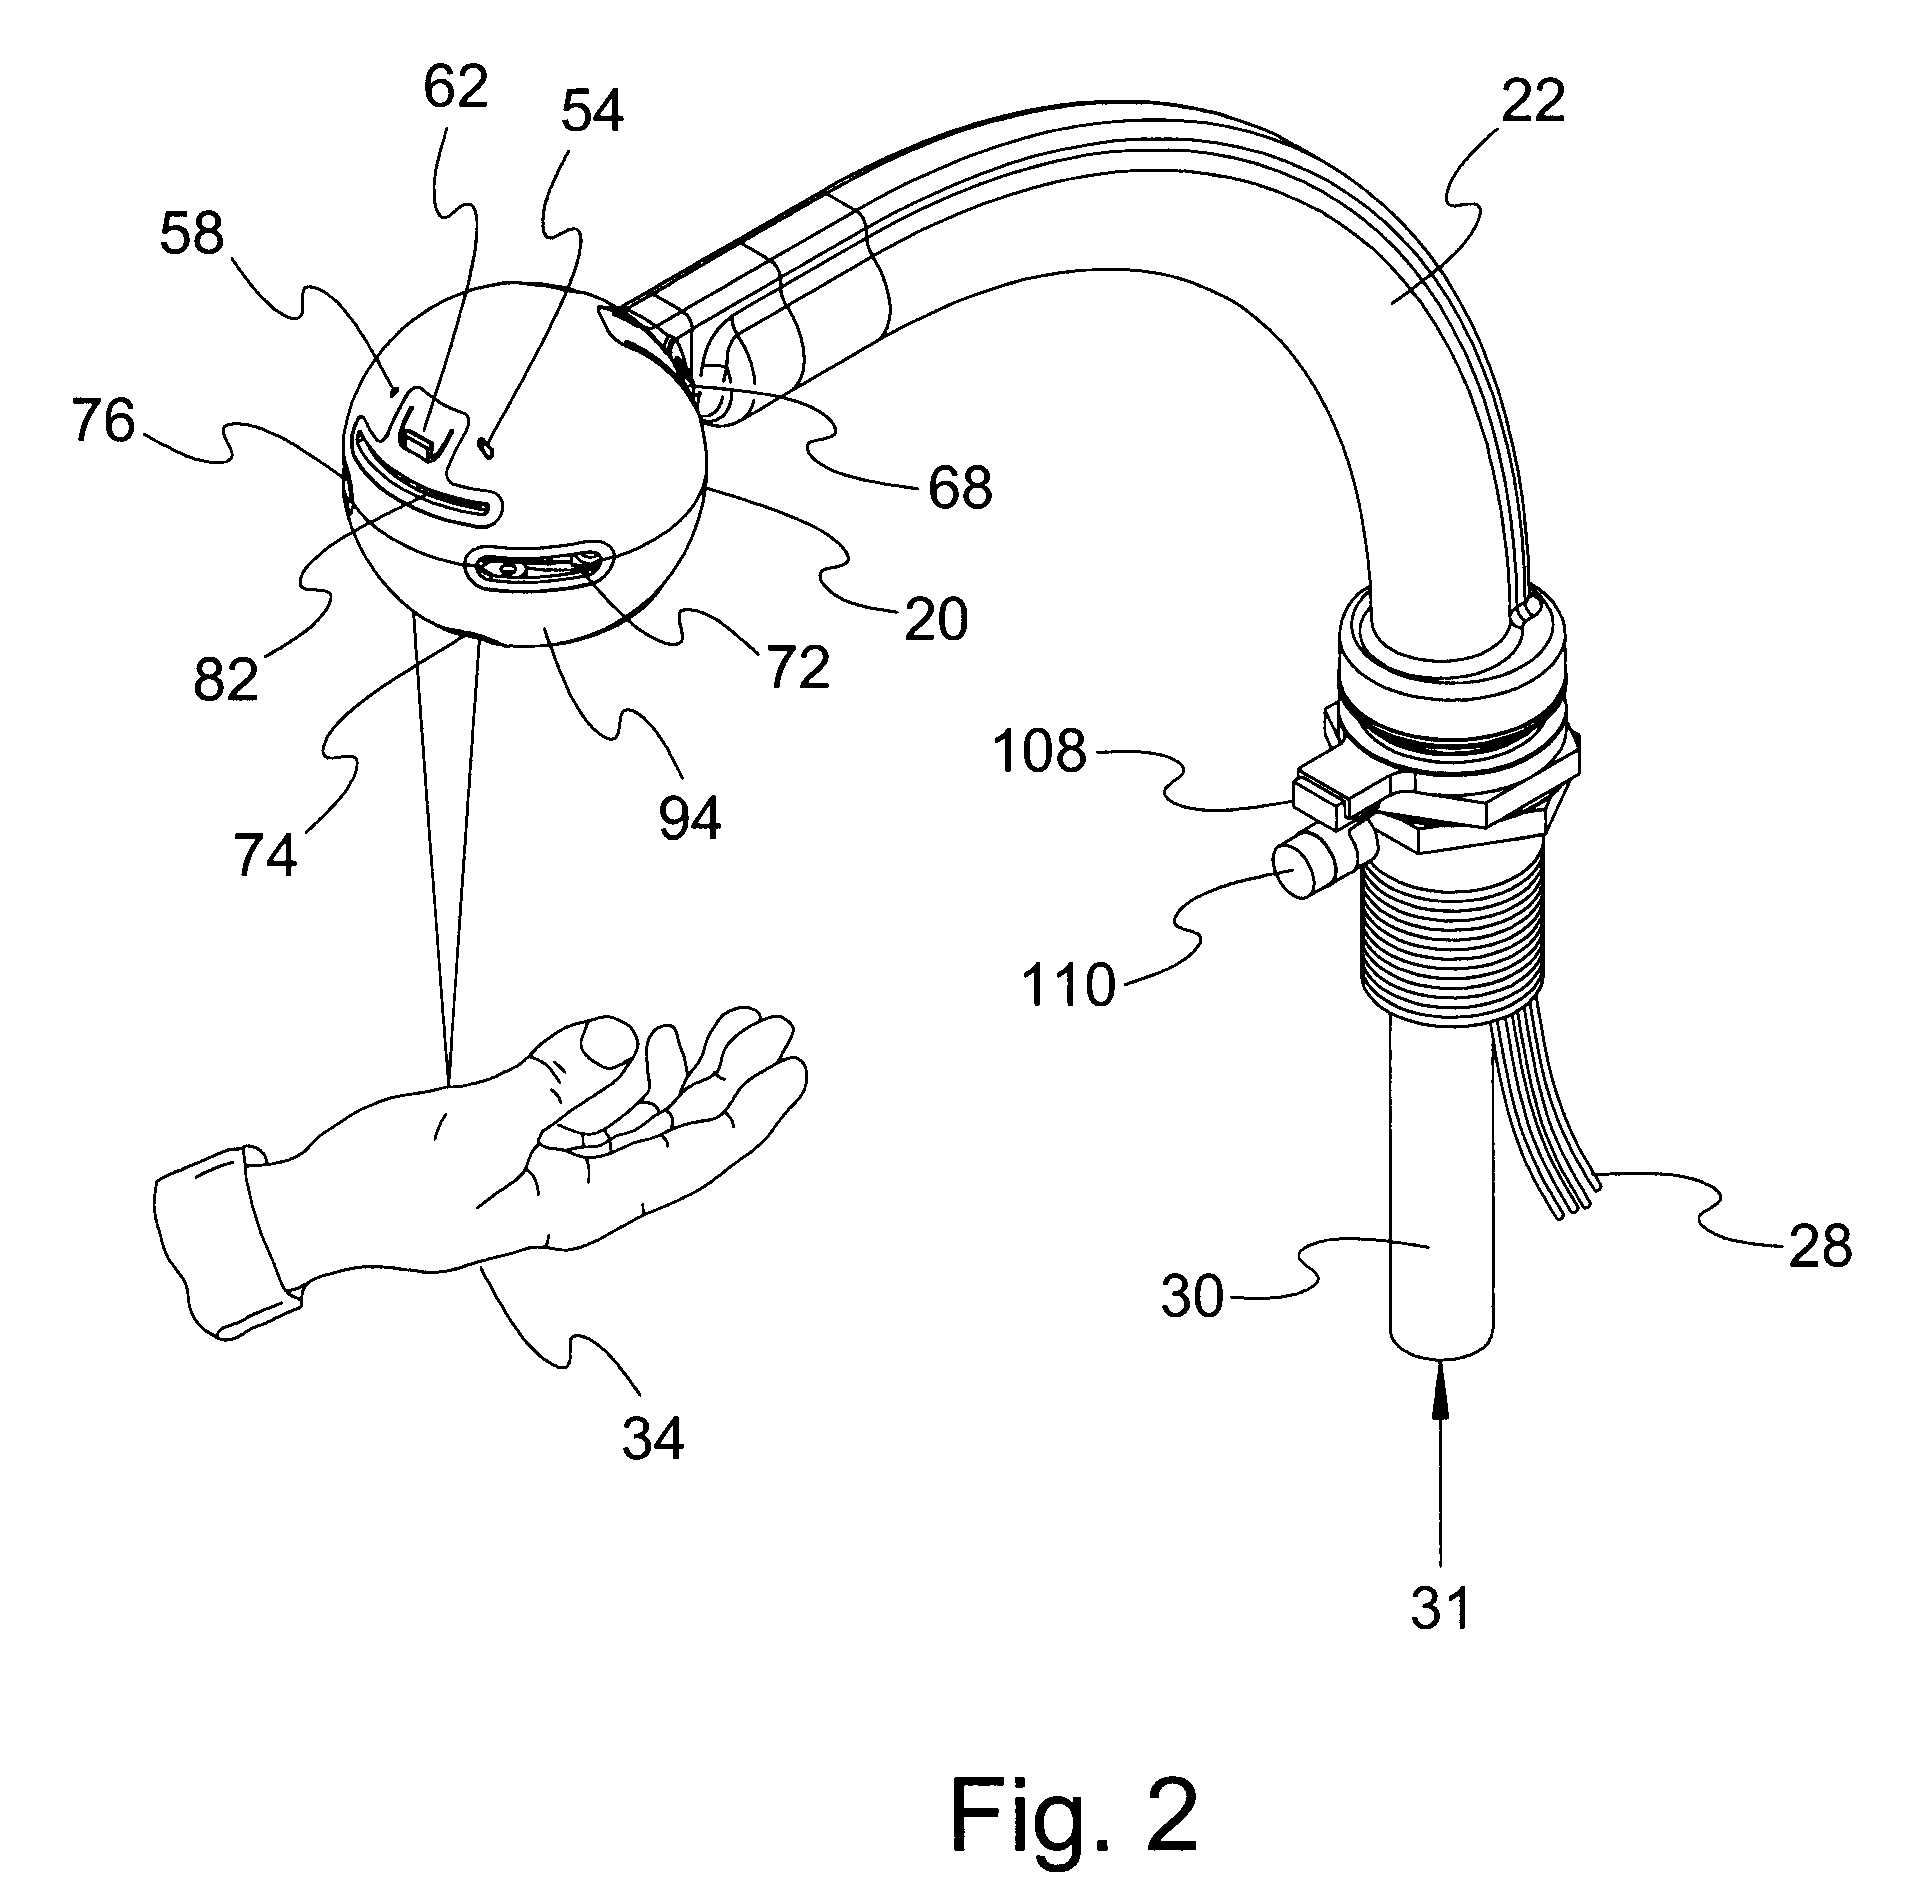 Electronic faucet with voice, temperature, flow and volume control